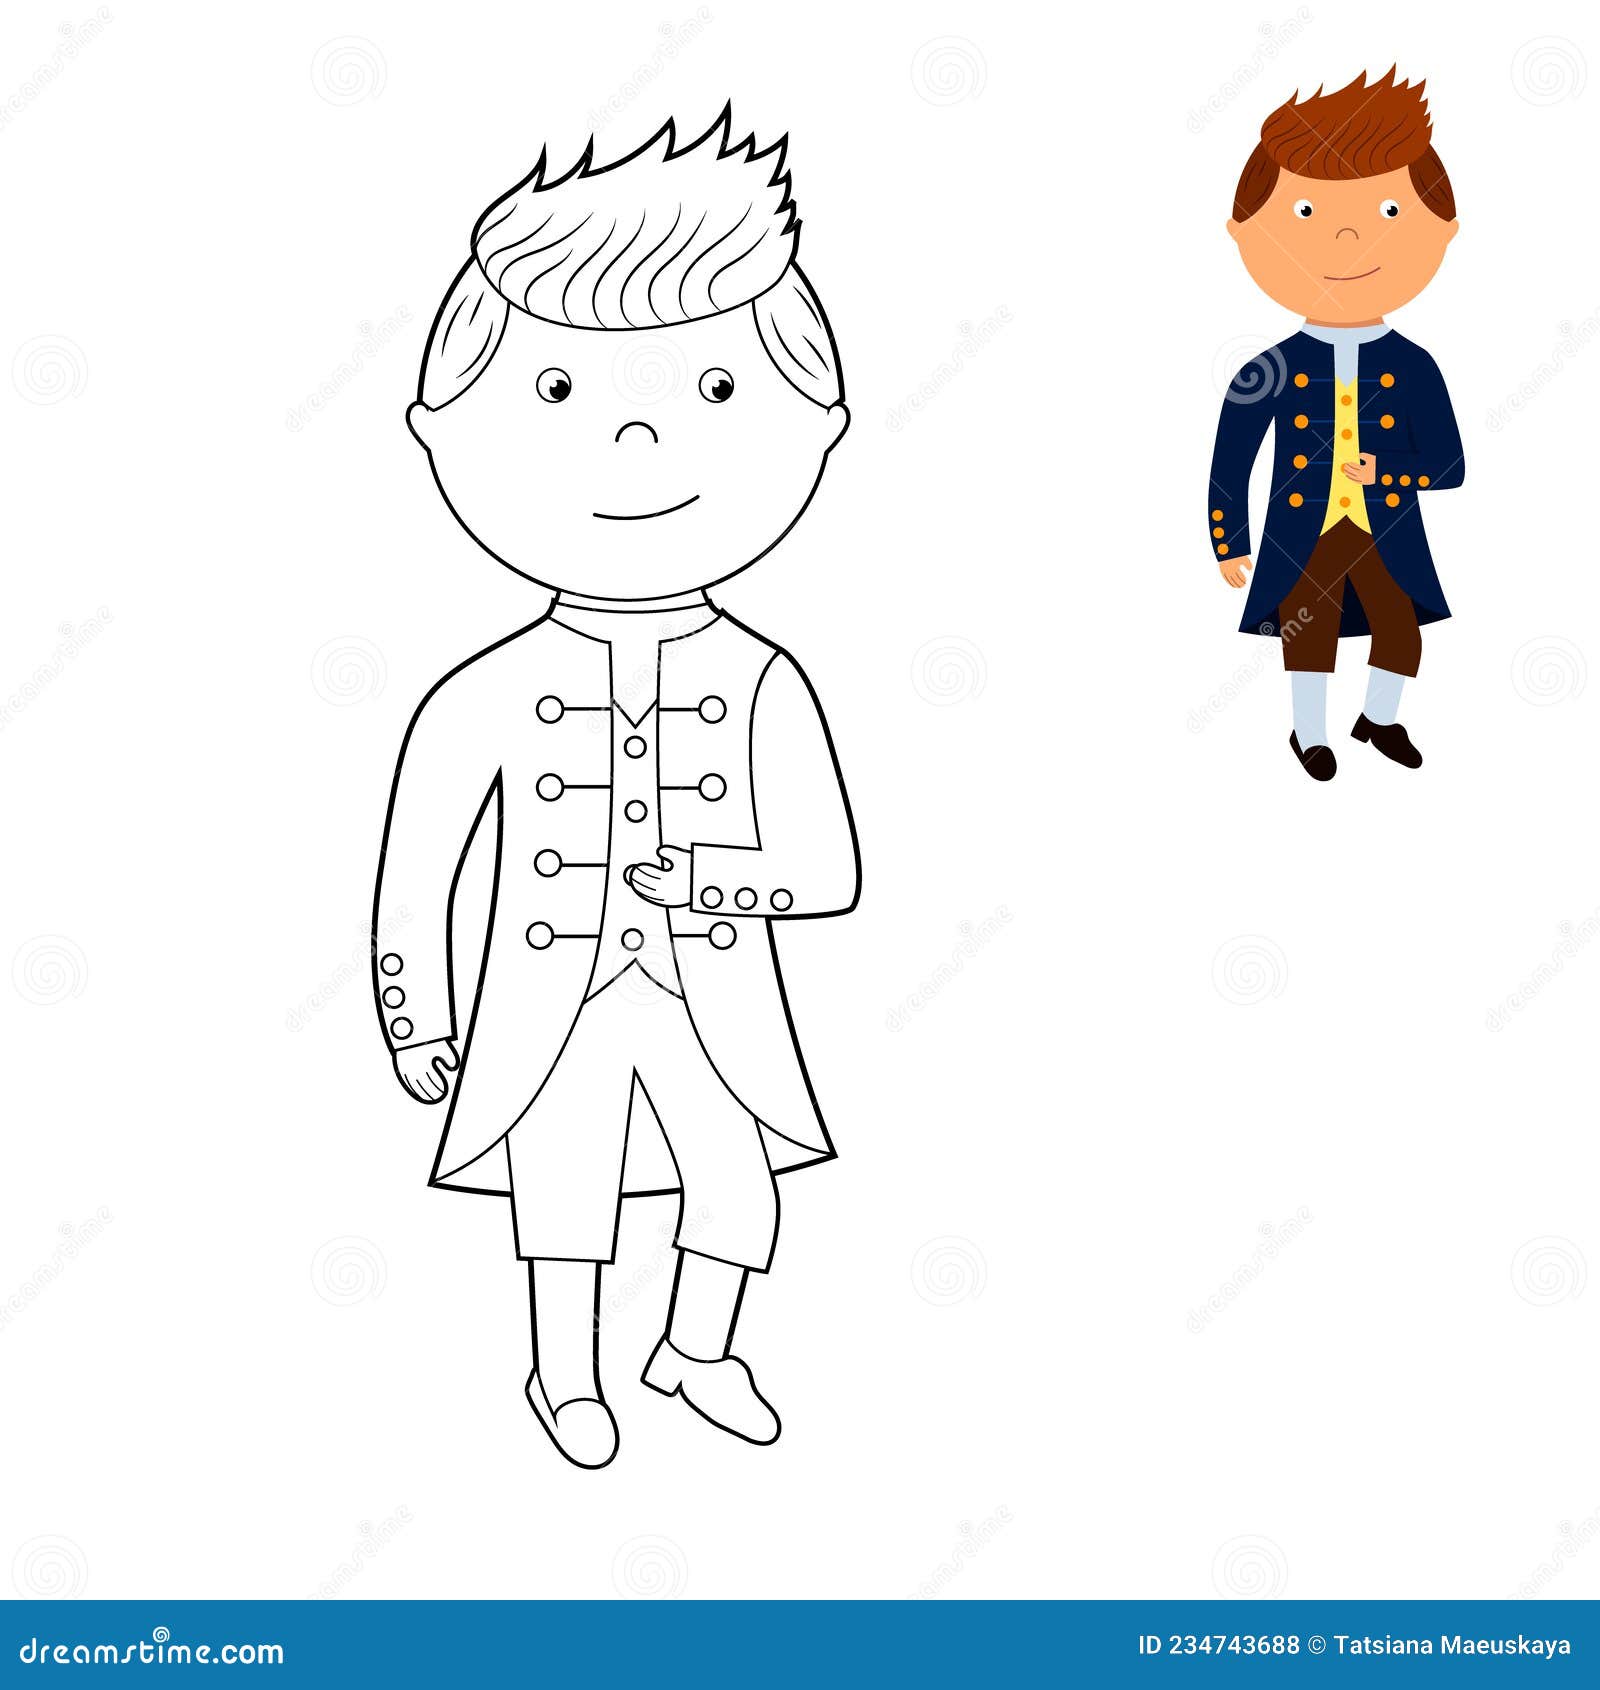 Coloring Book, Cute Prince, Boy in Fancy Dress. Vector Illustration ...